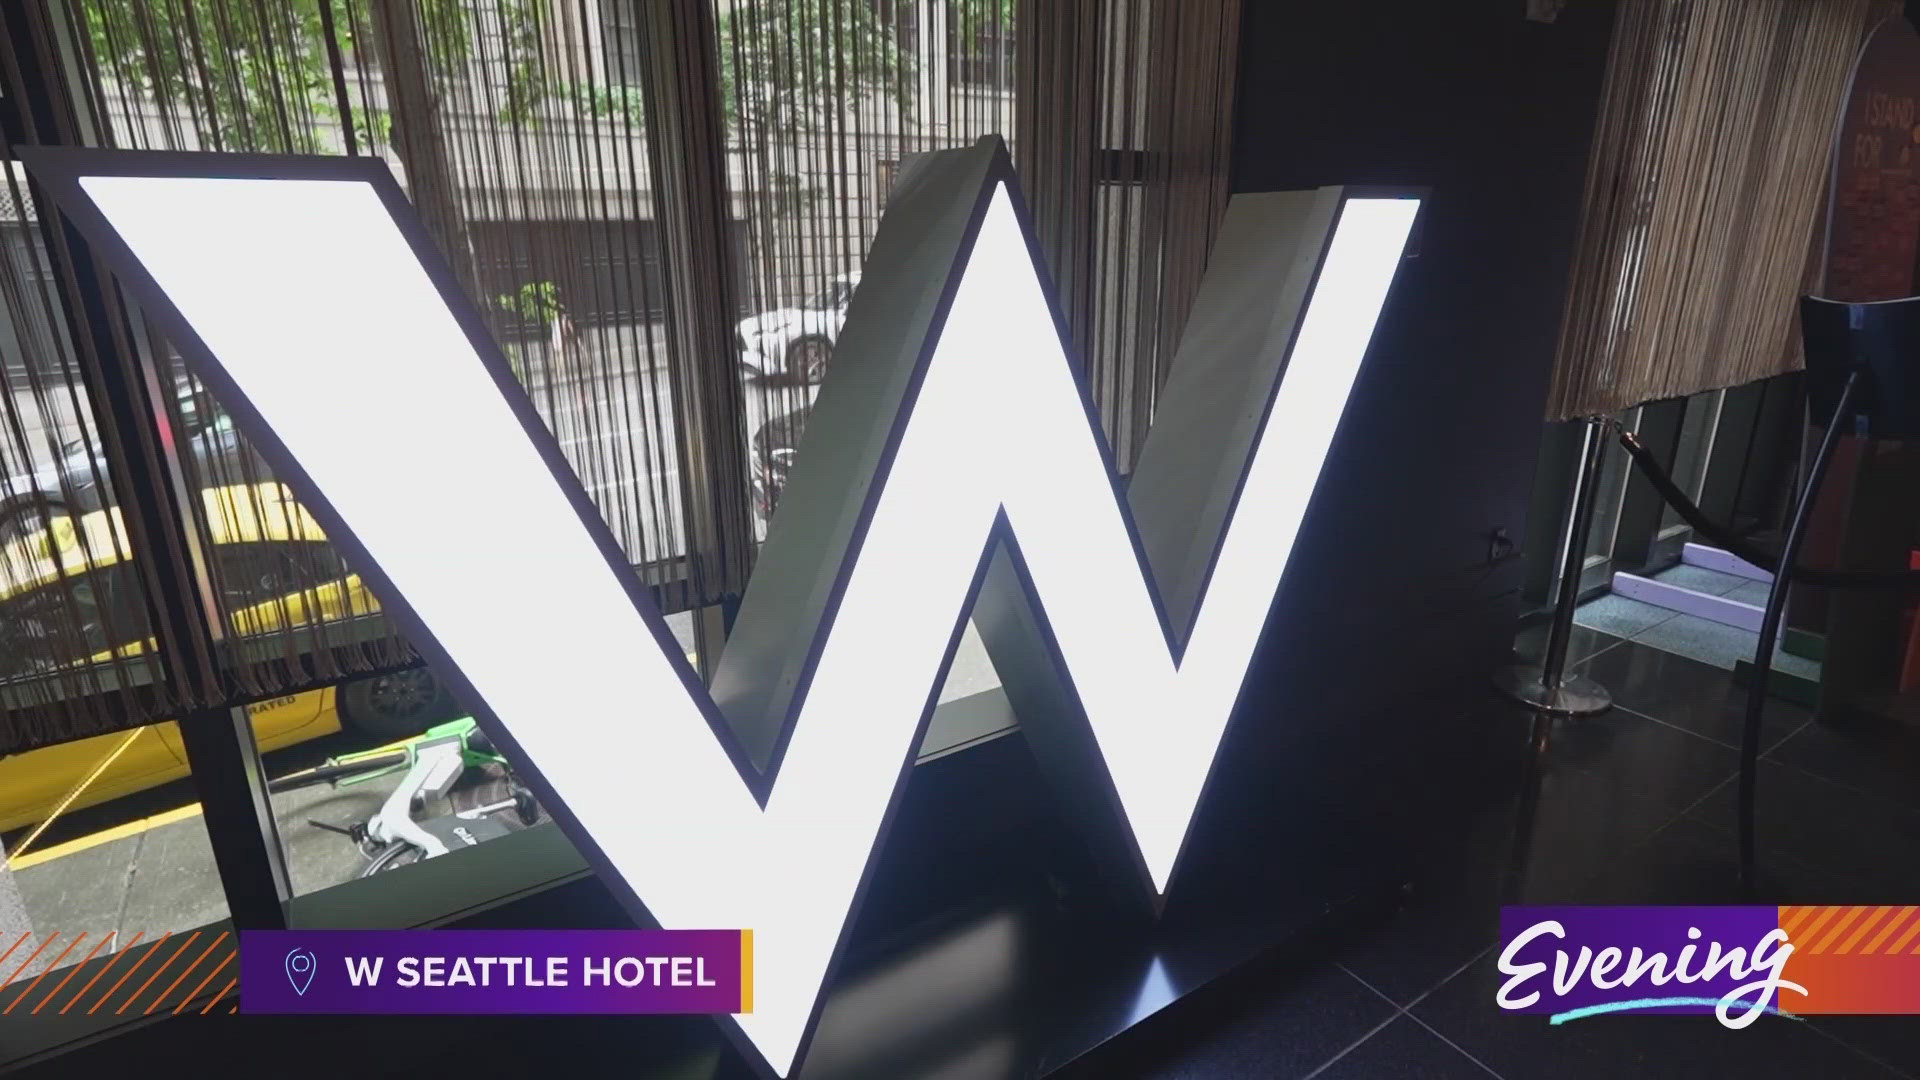 The W Seattle was the first hotel to fly the pride flag in the city. #k5evening